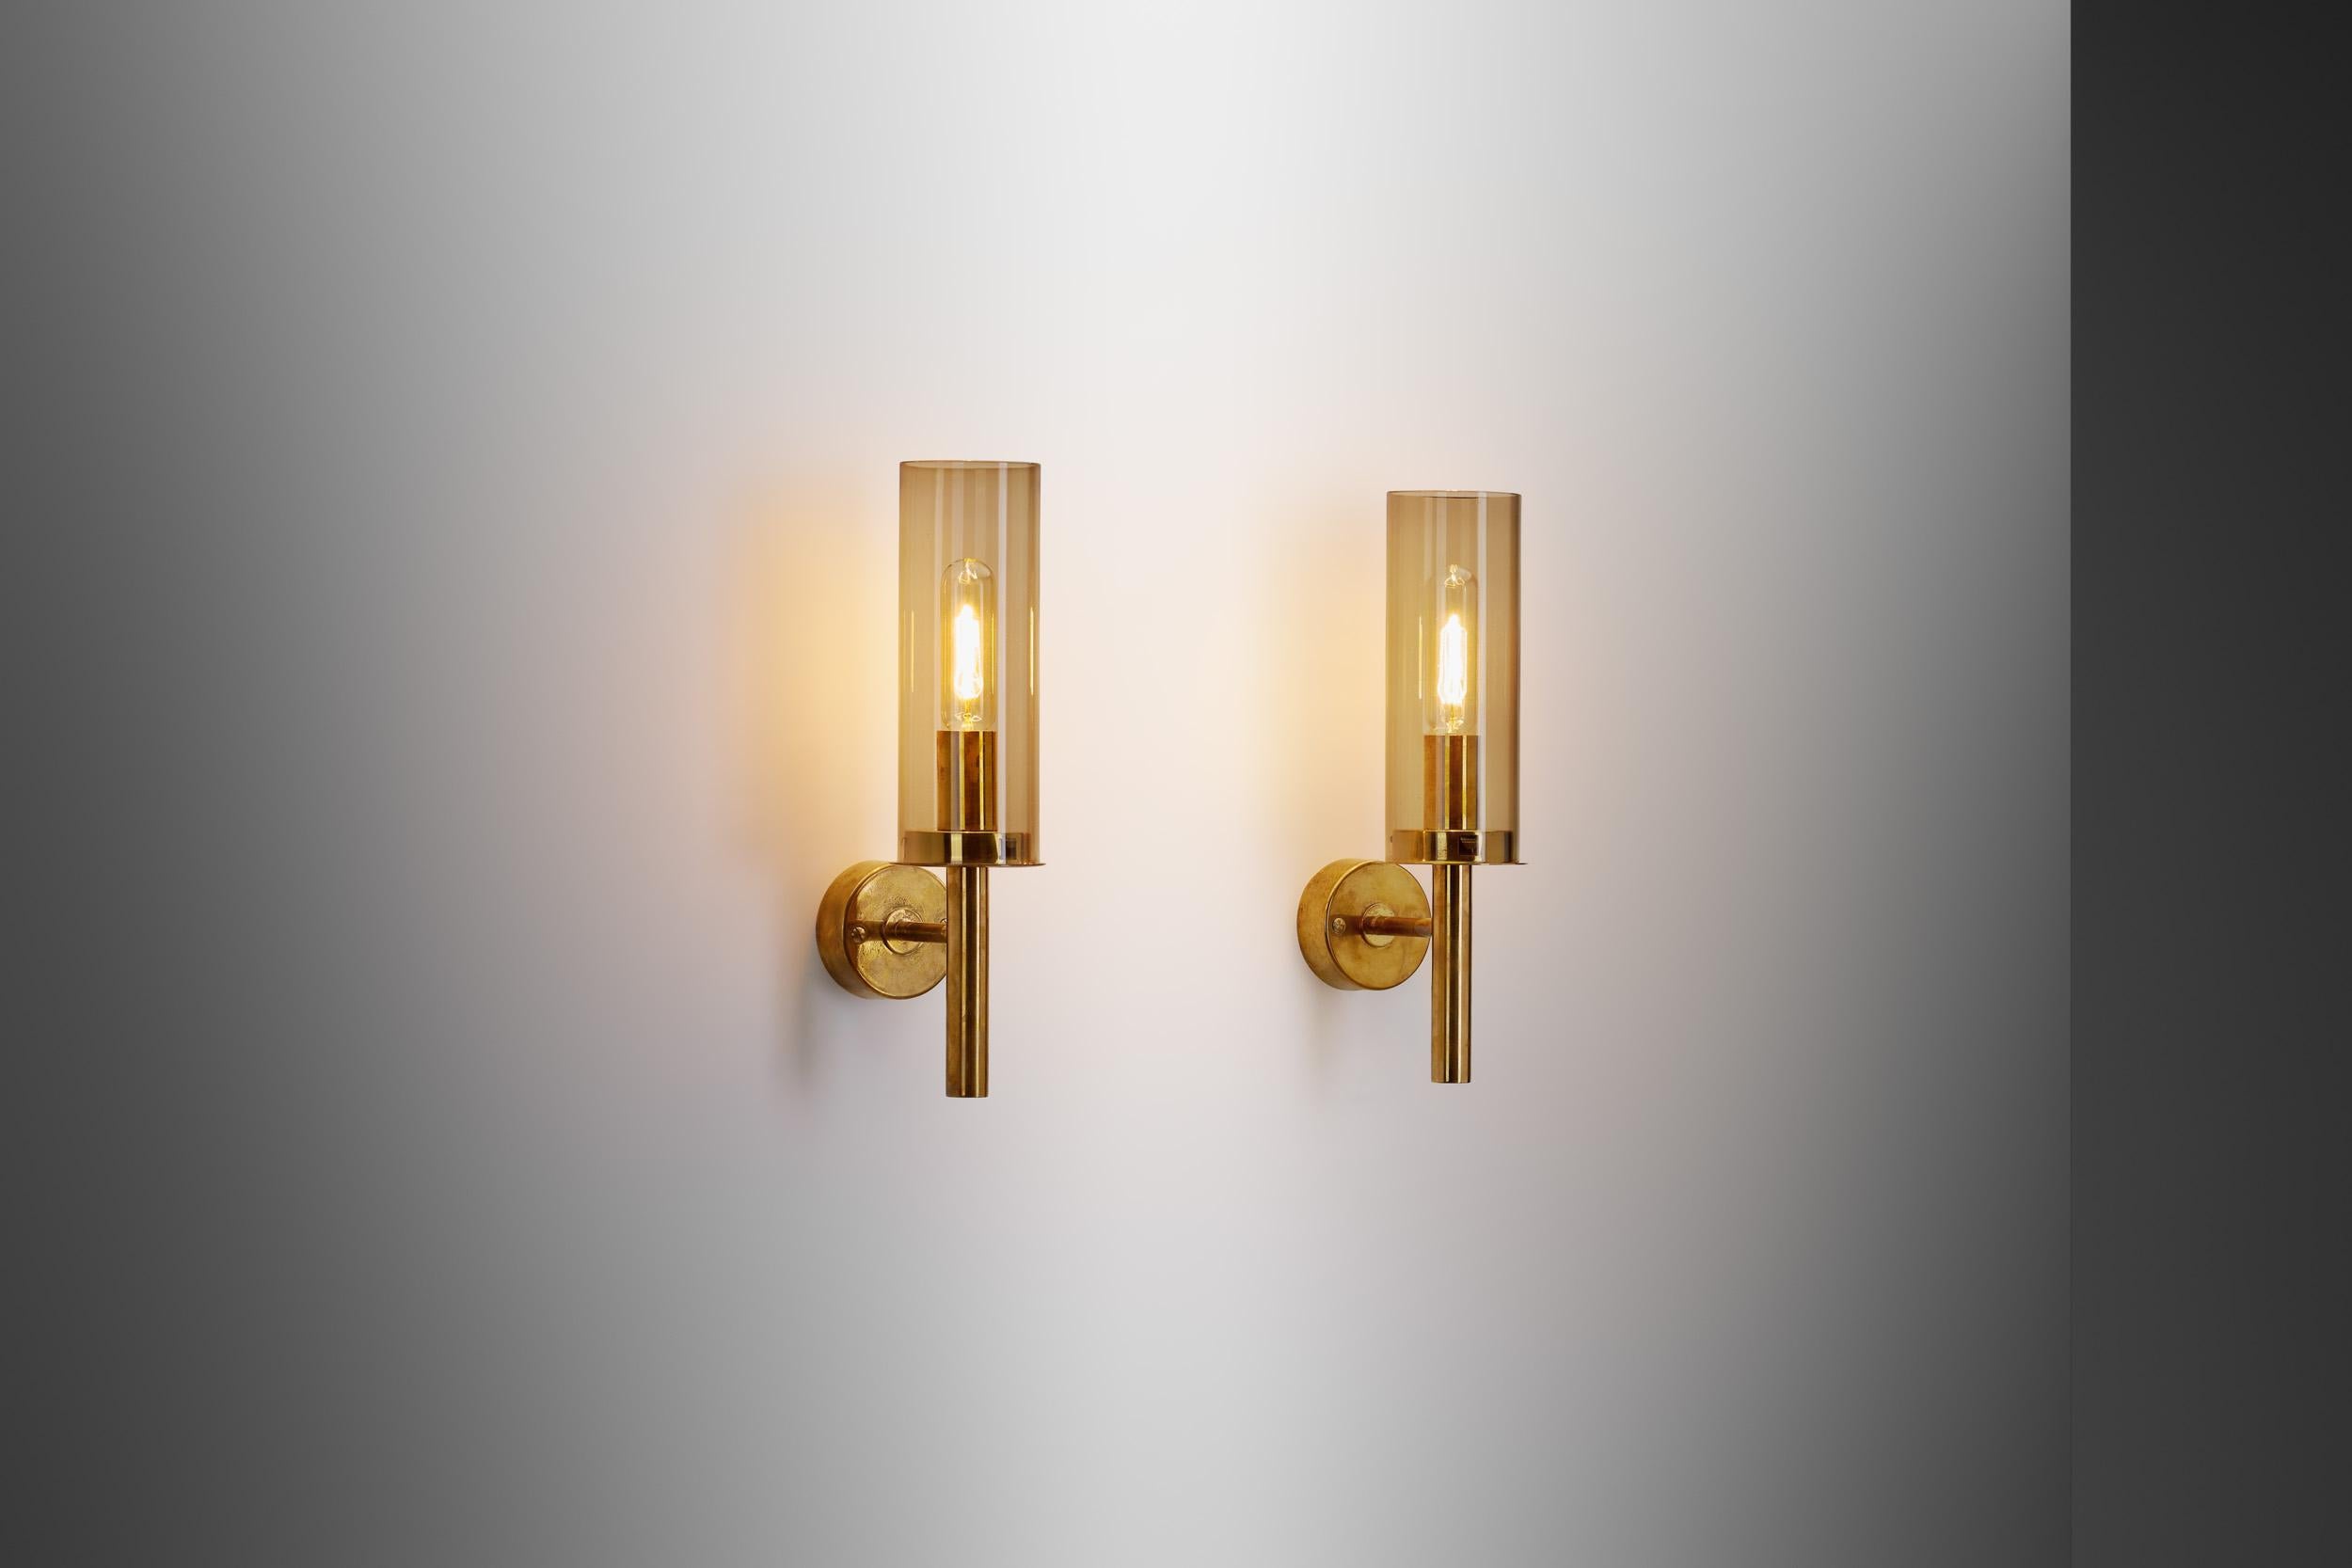 While Hans-Agne Jakobsson designed and produced various types of furniture, his lighting received greater international attention, not without a good reason. As these “V-169/1” wall lamps showcase, the Swedish designer mastered both the direction